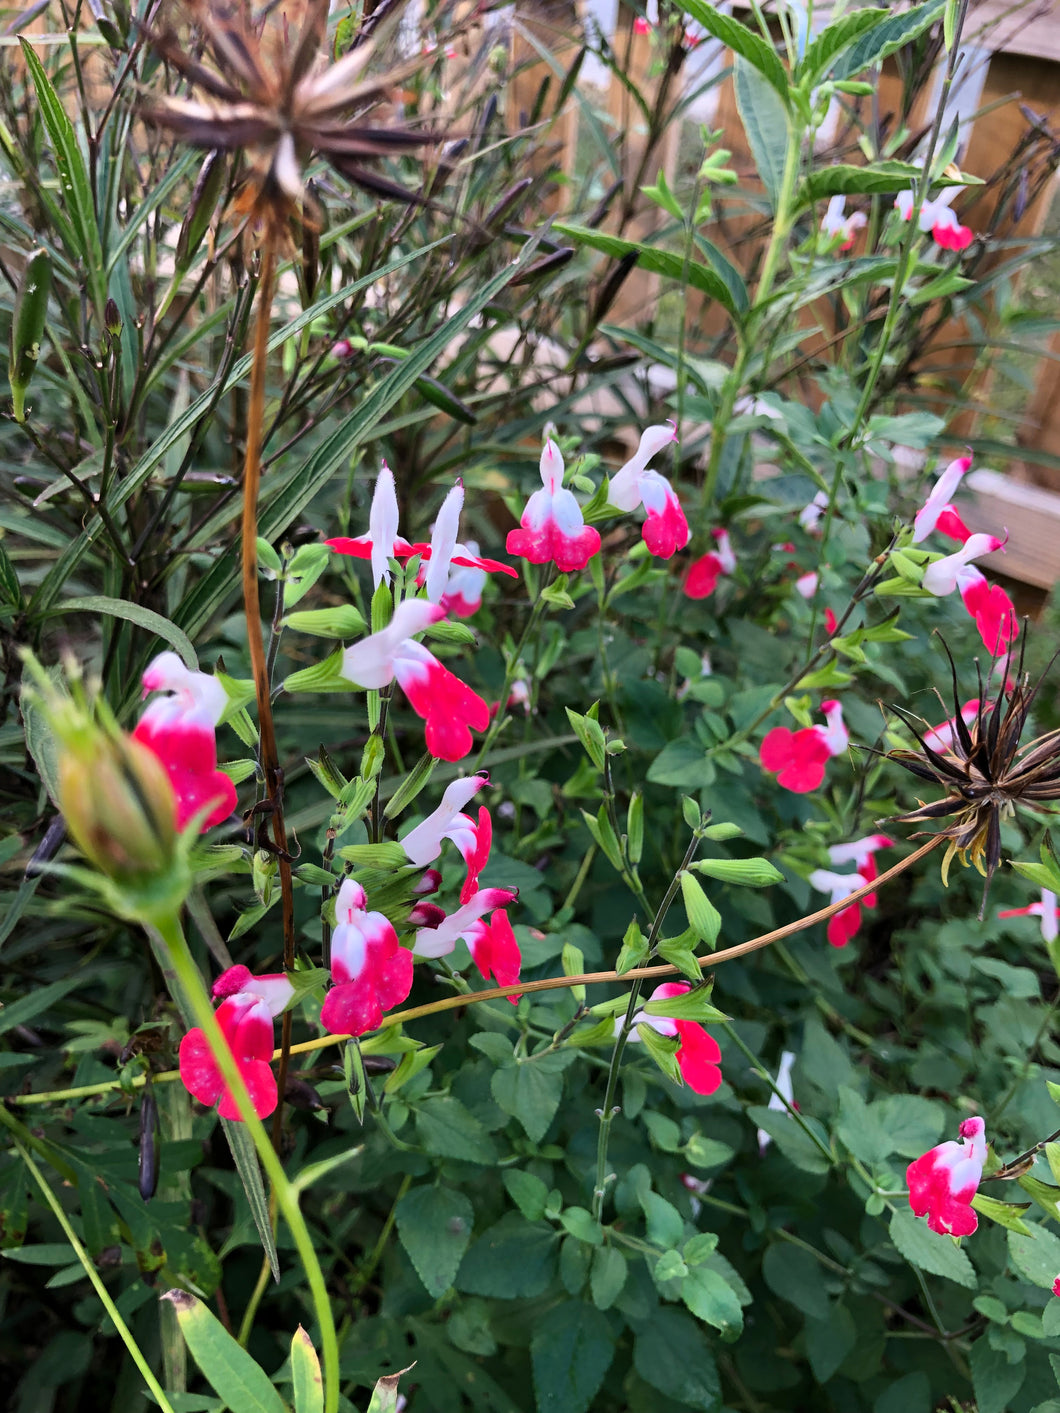  Hot Lips Salvia or Salvia microphylla Pint Plant**AVAILABLE SPRING 2023** Southern Flower Garden  Southern Flower Garden